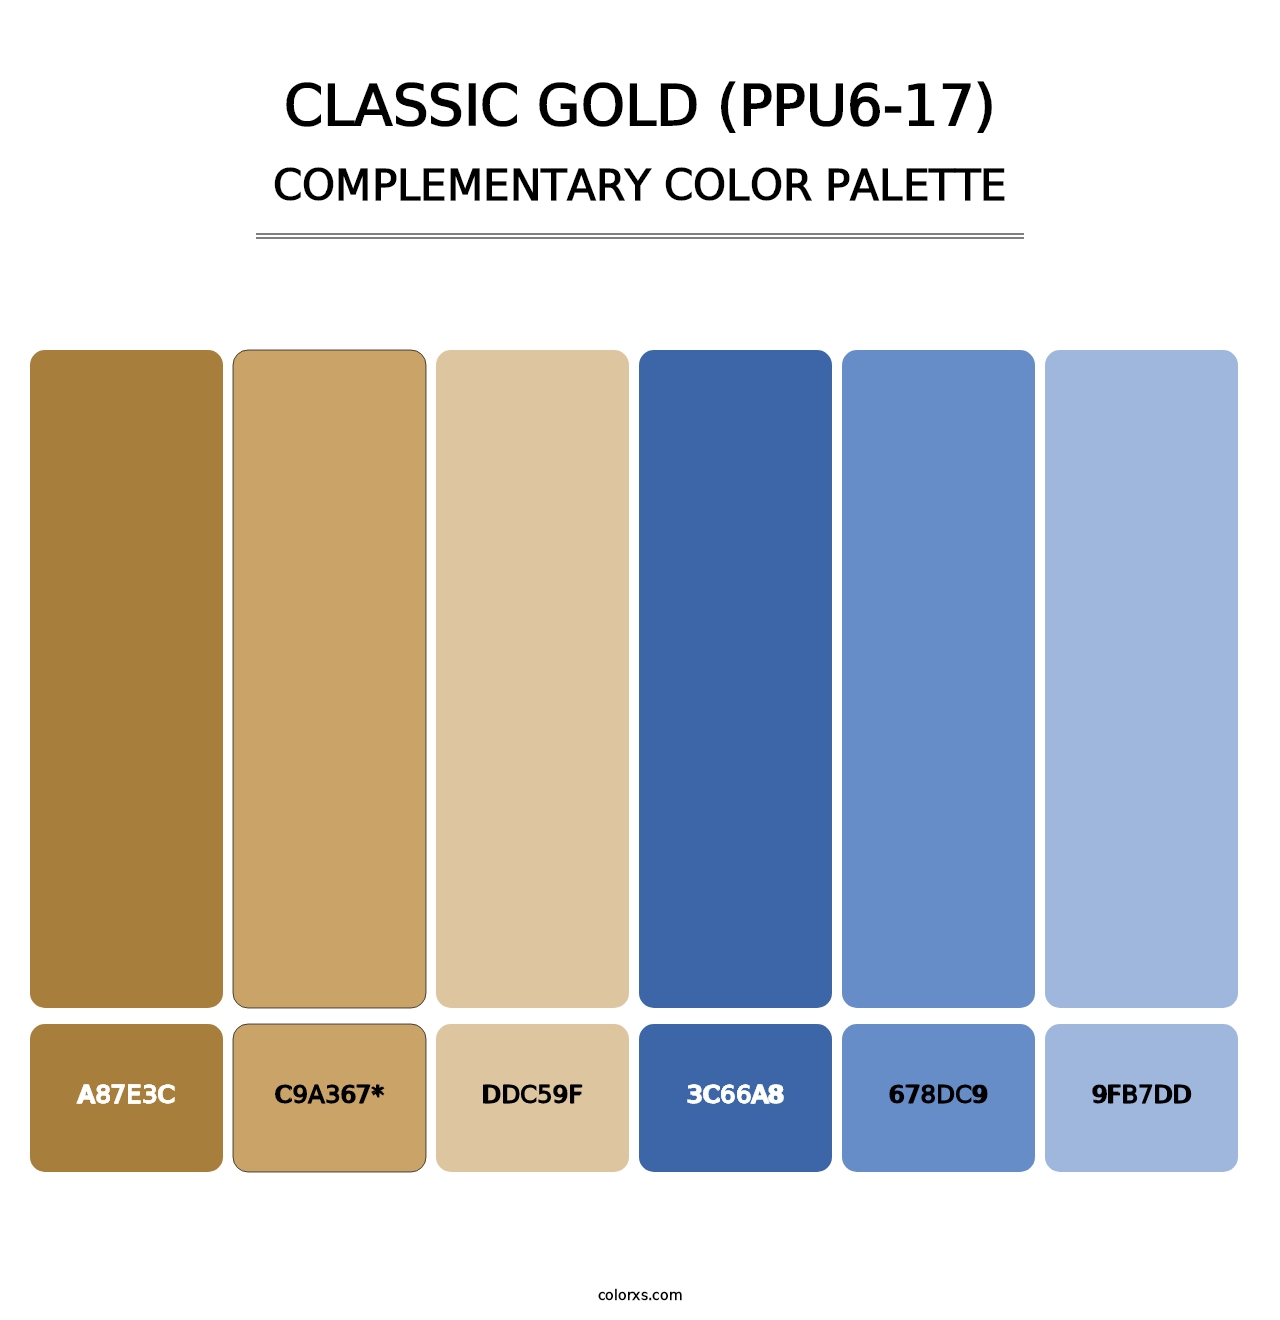 Classic Gold (PPU6-17) - Complementary Color Palette